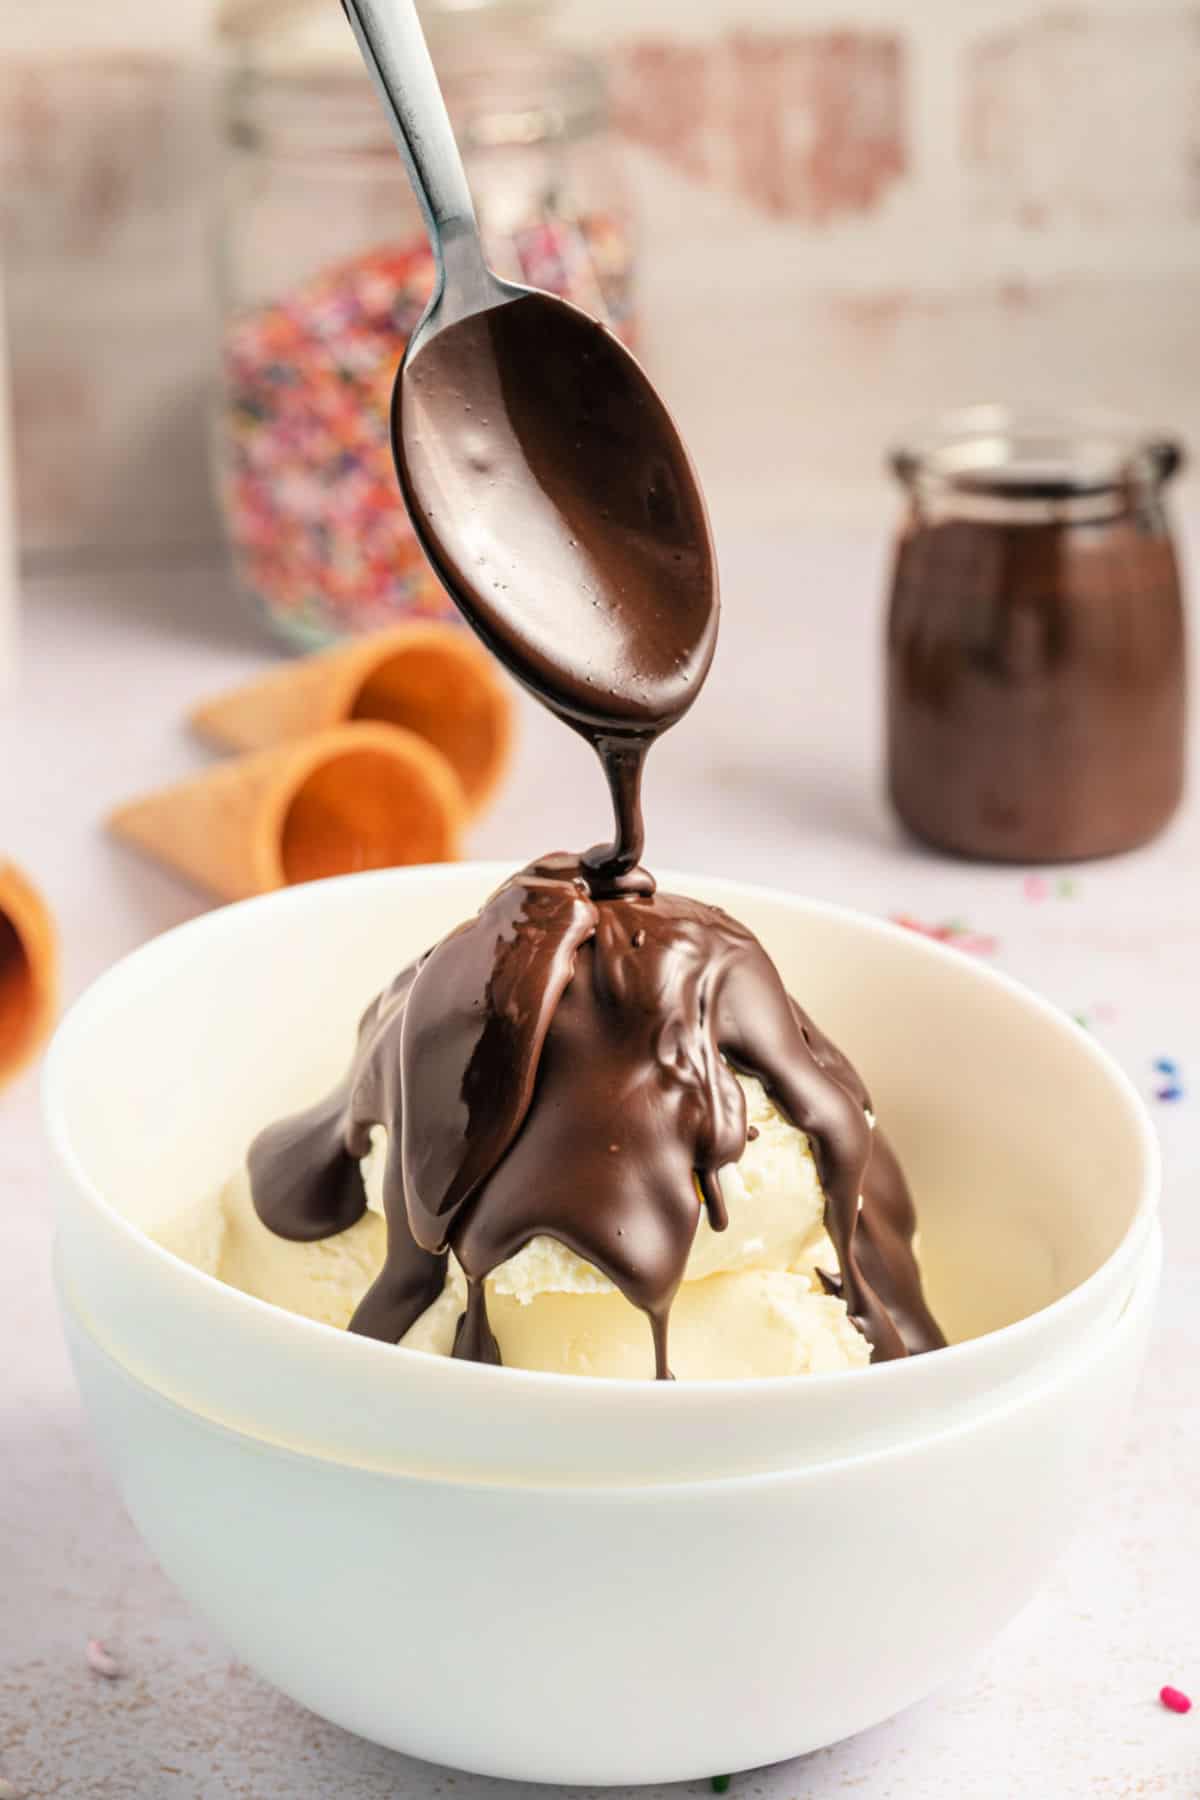 Chocolate sauce being drizzled over a bowl of vanilla ice cream with a spoon.